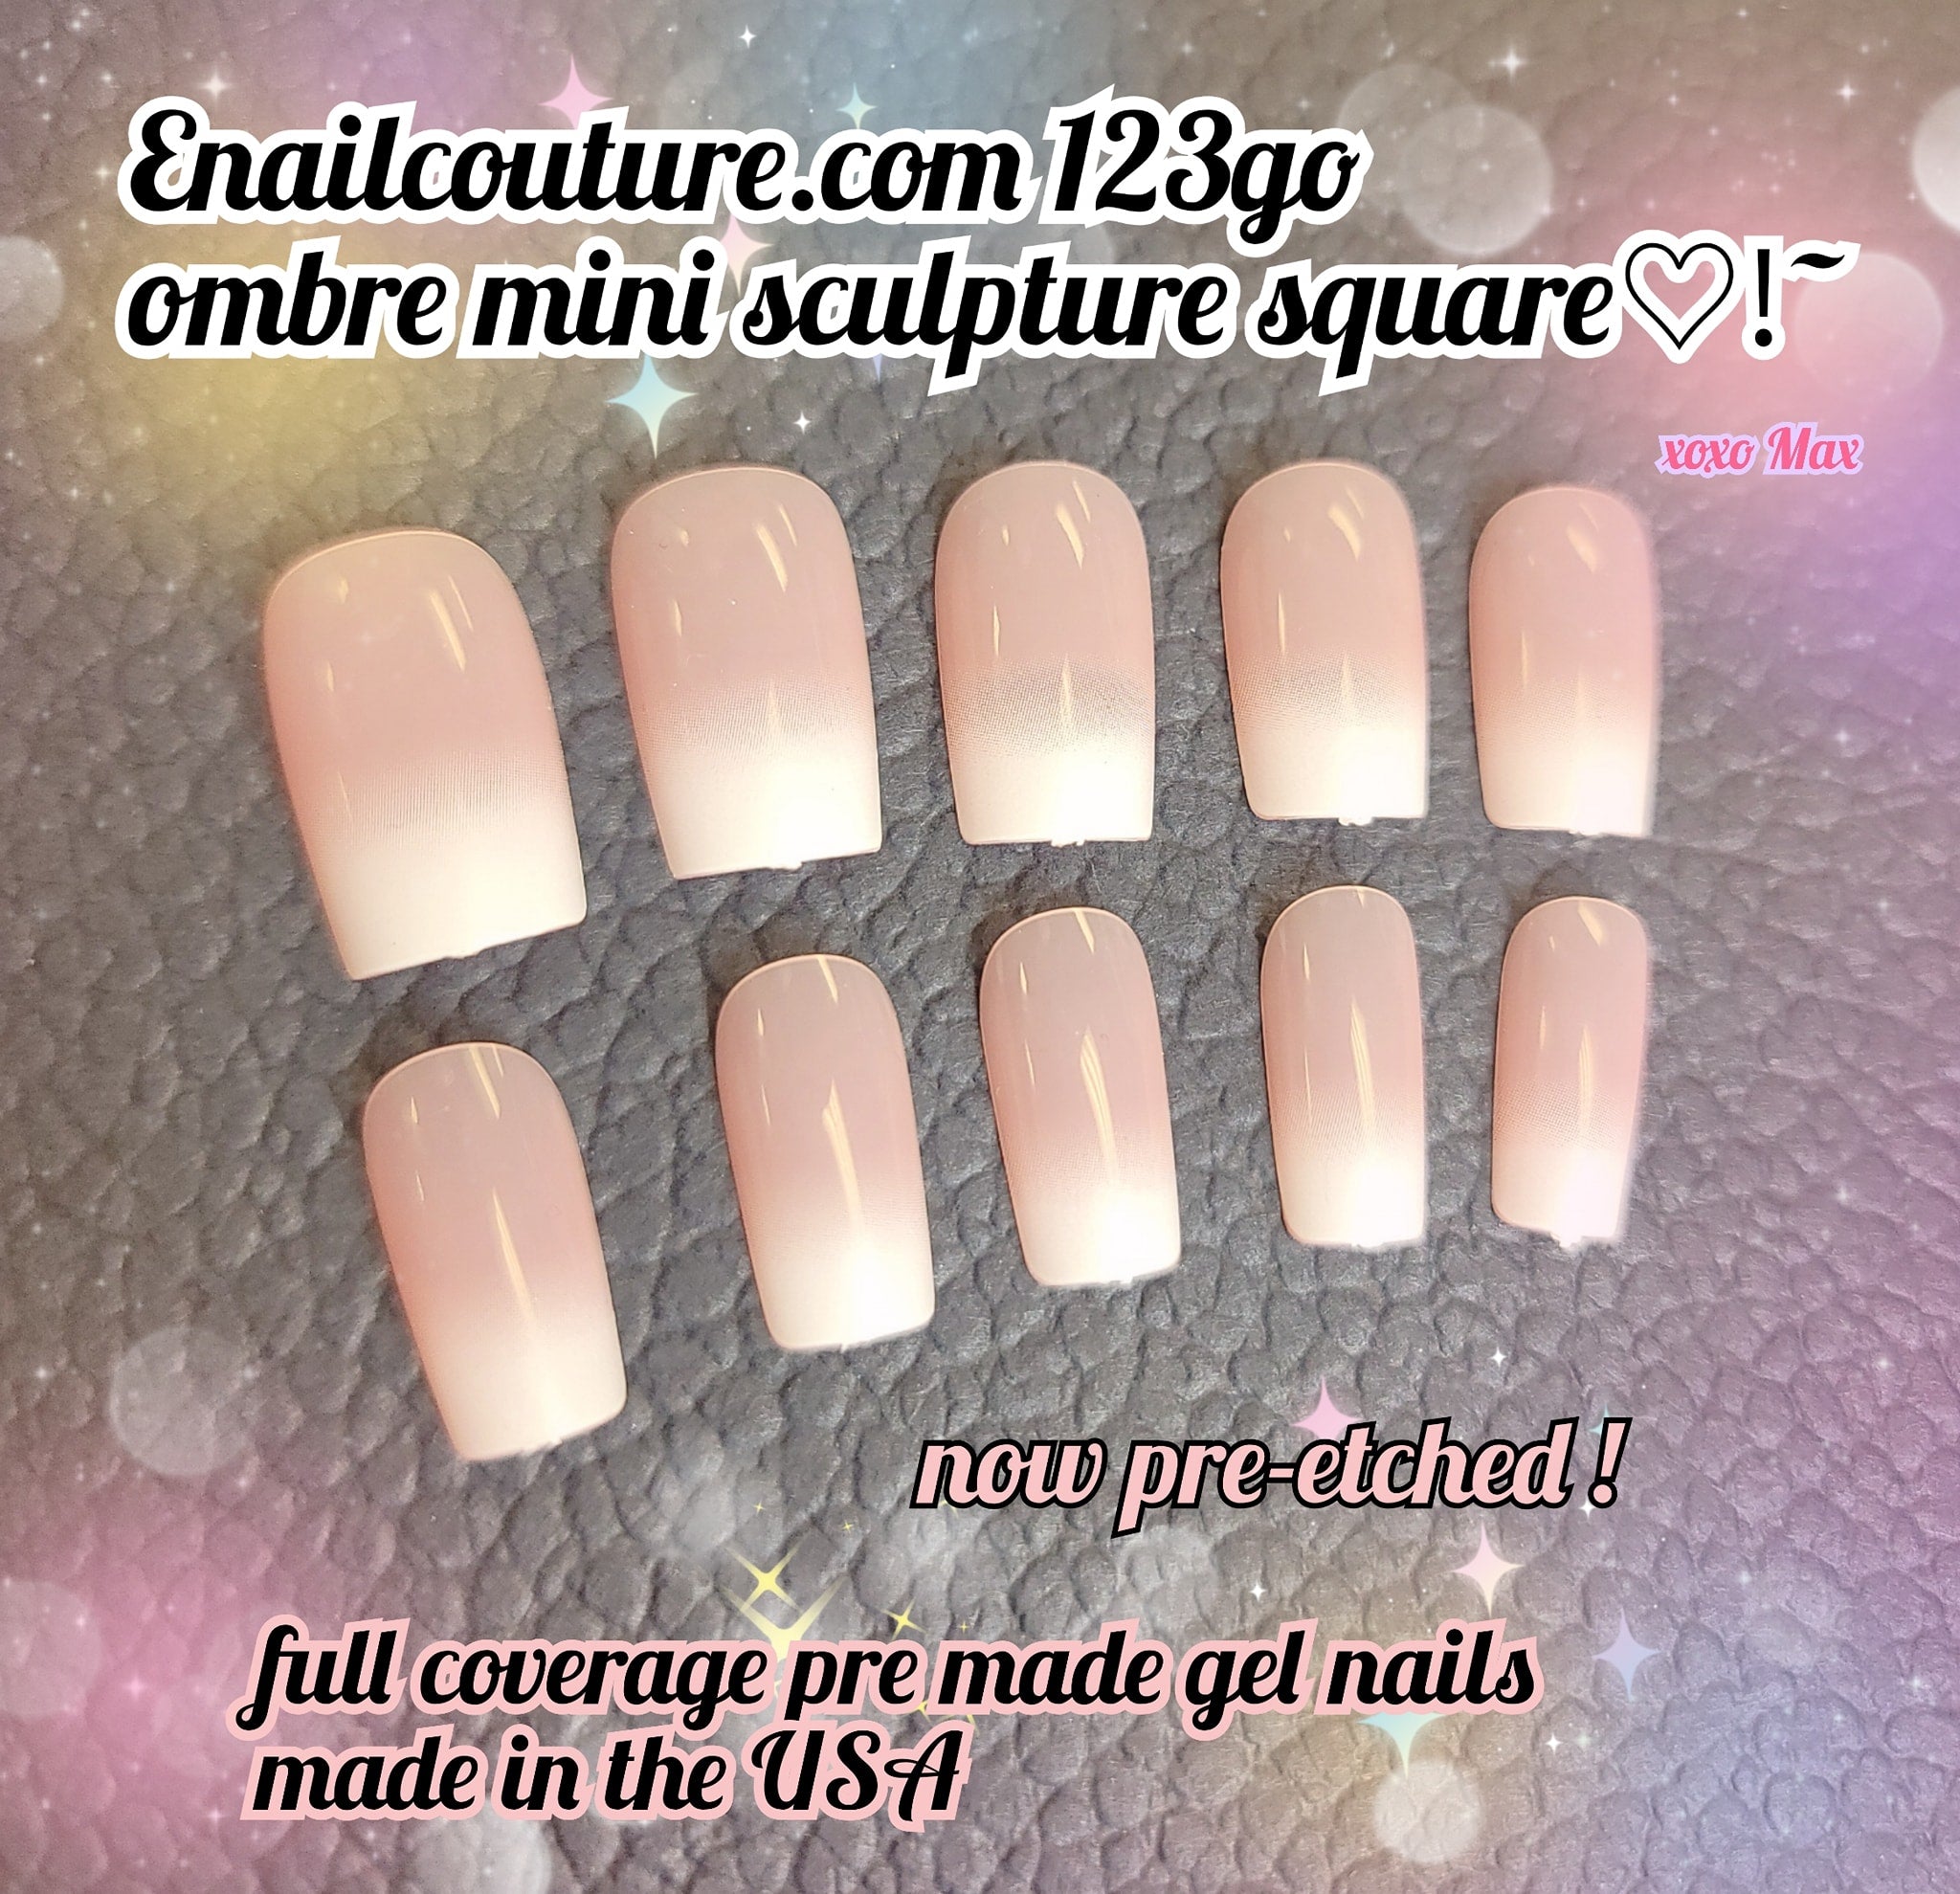 Black French 123 Go! Nails (pre made full coverage gel nail tips) (Ful